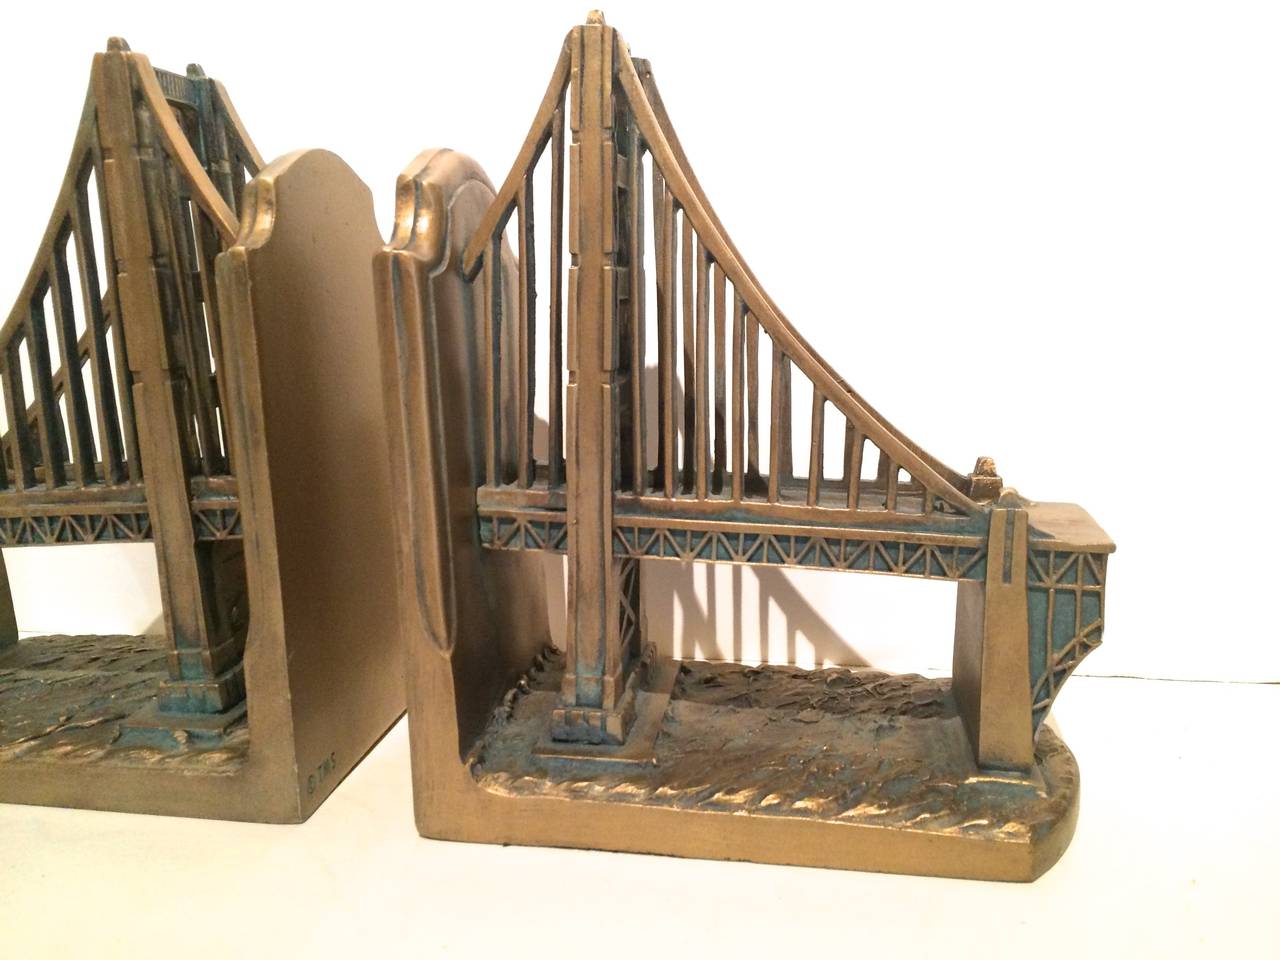 Pair of gilt golden gate bridge bookends. These appear to be plaster and in great vintage condition. Perfect for the library, study, kids room or perhaps your favorite city!